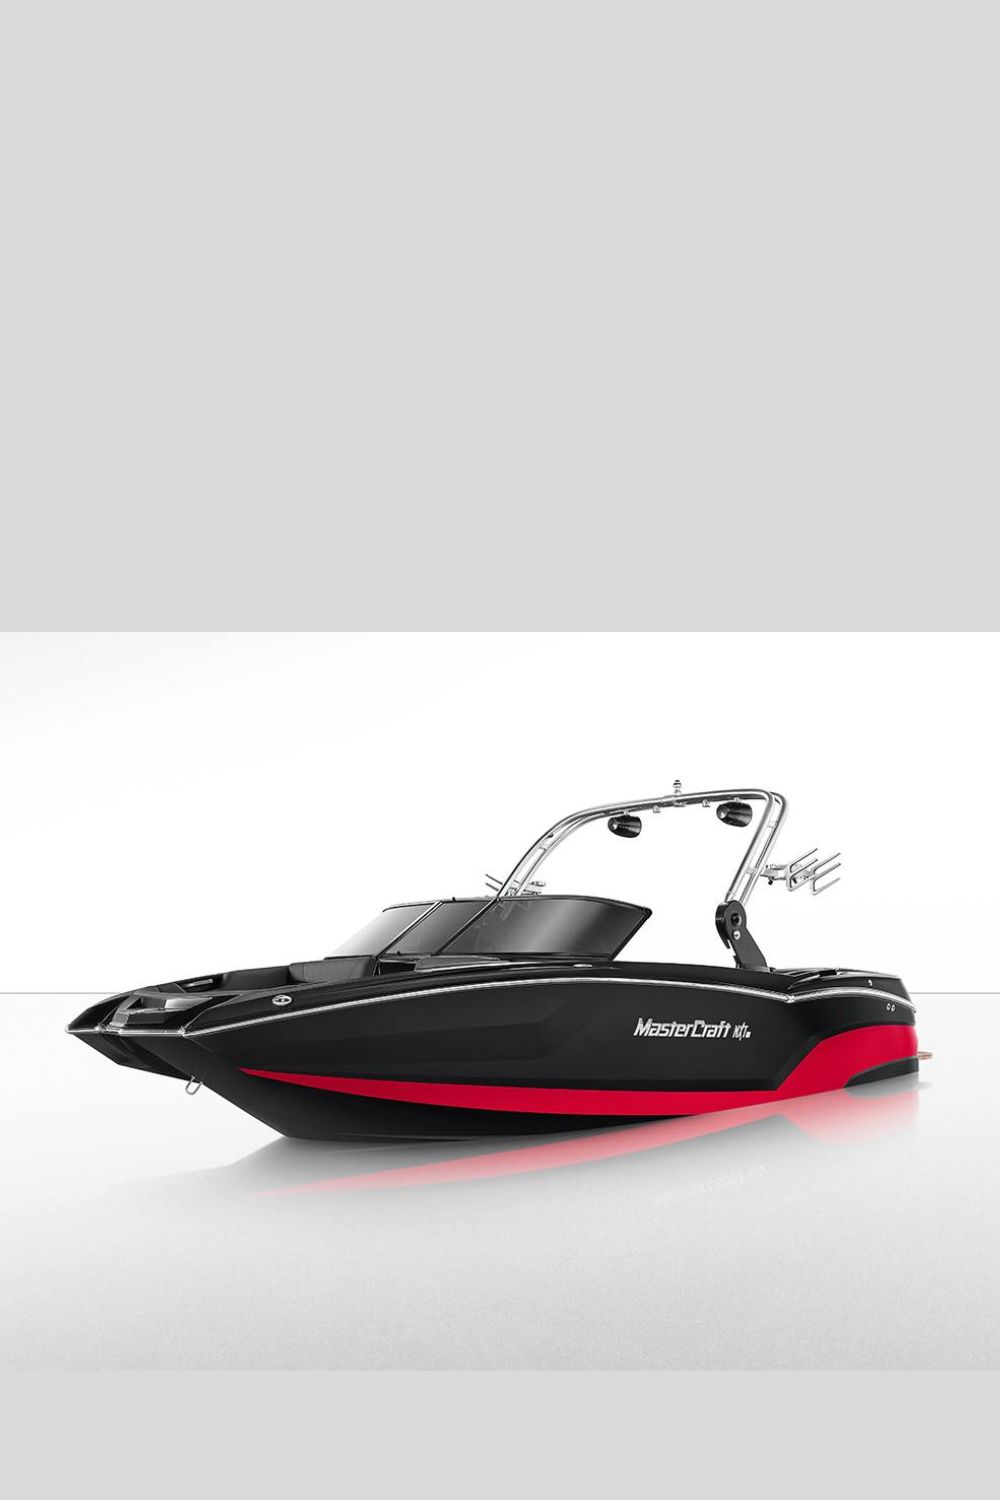  Wide Selection Of Mastercraft Nxt22